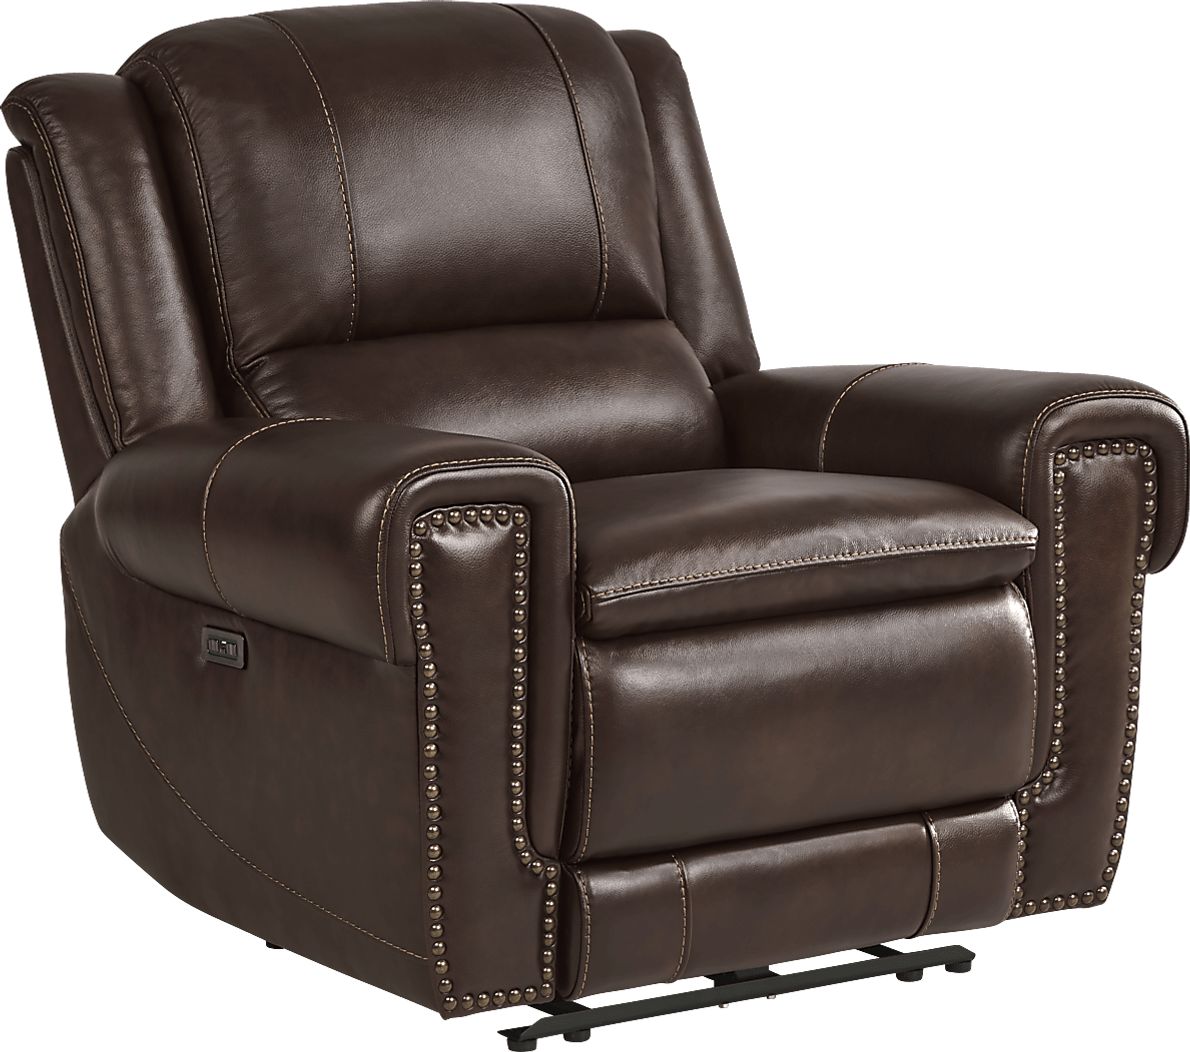 Amesbury Leather Dual Power Recliner